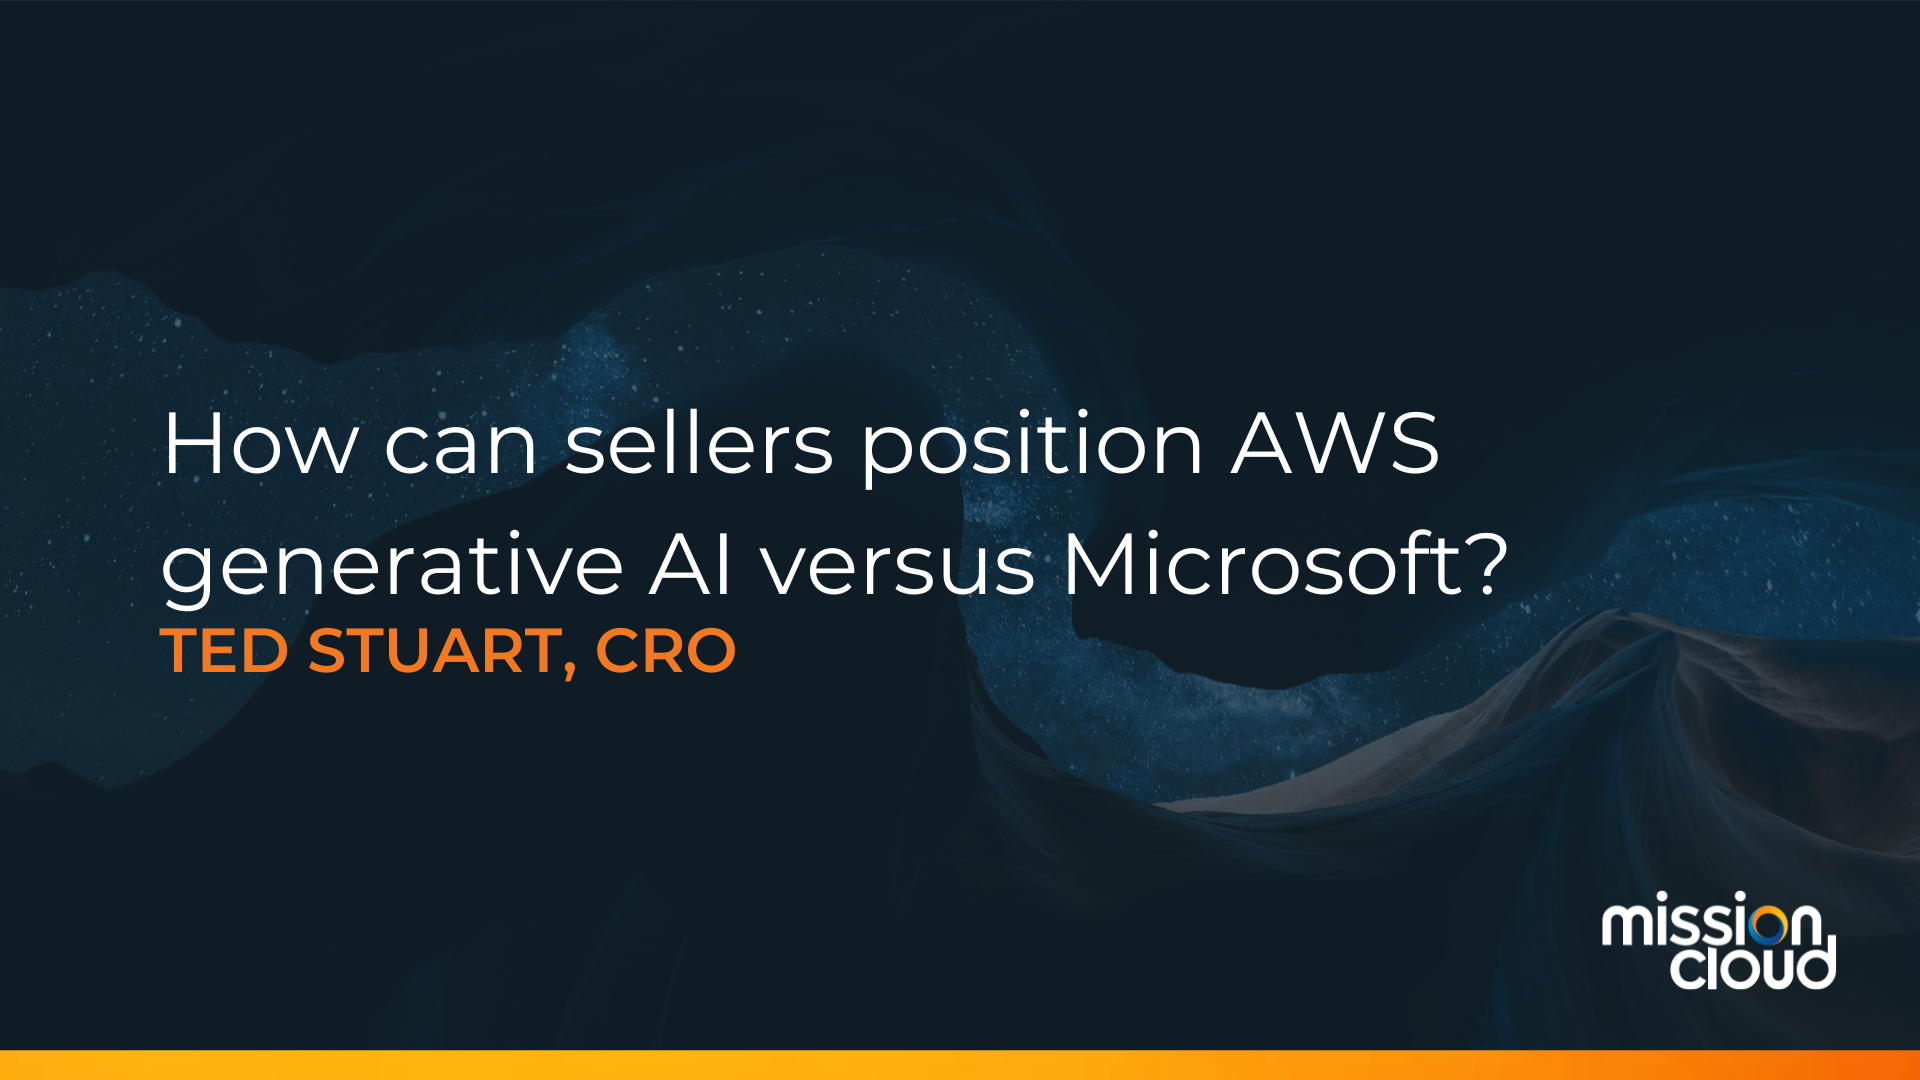 How can sellers have an introductory business conversation around generative AI